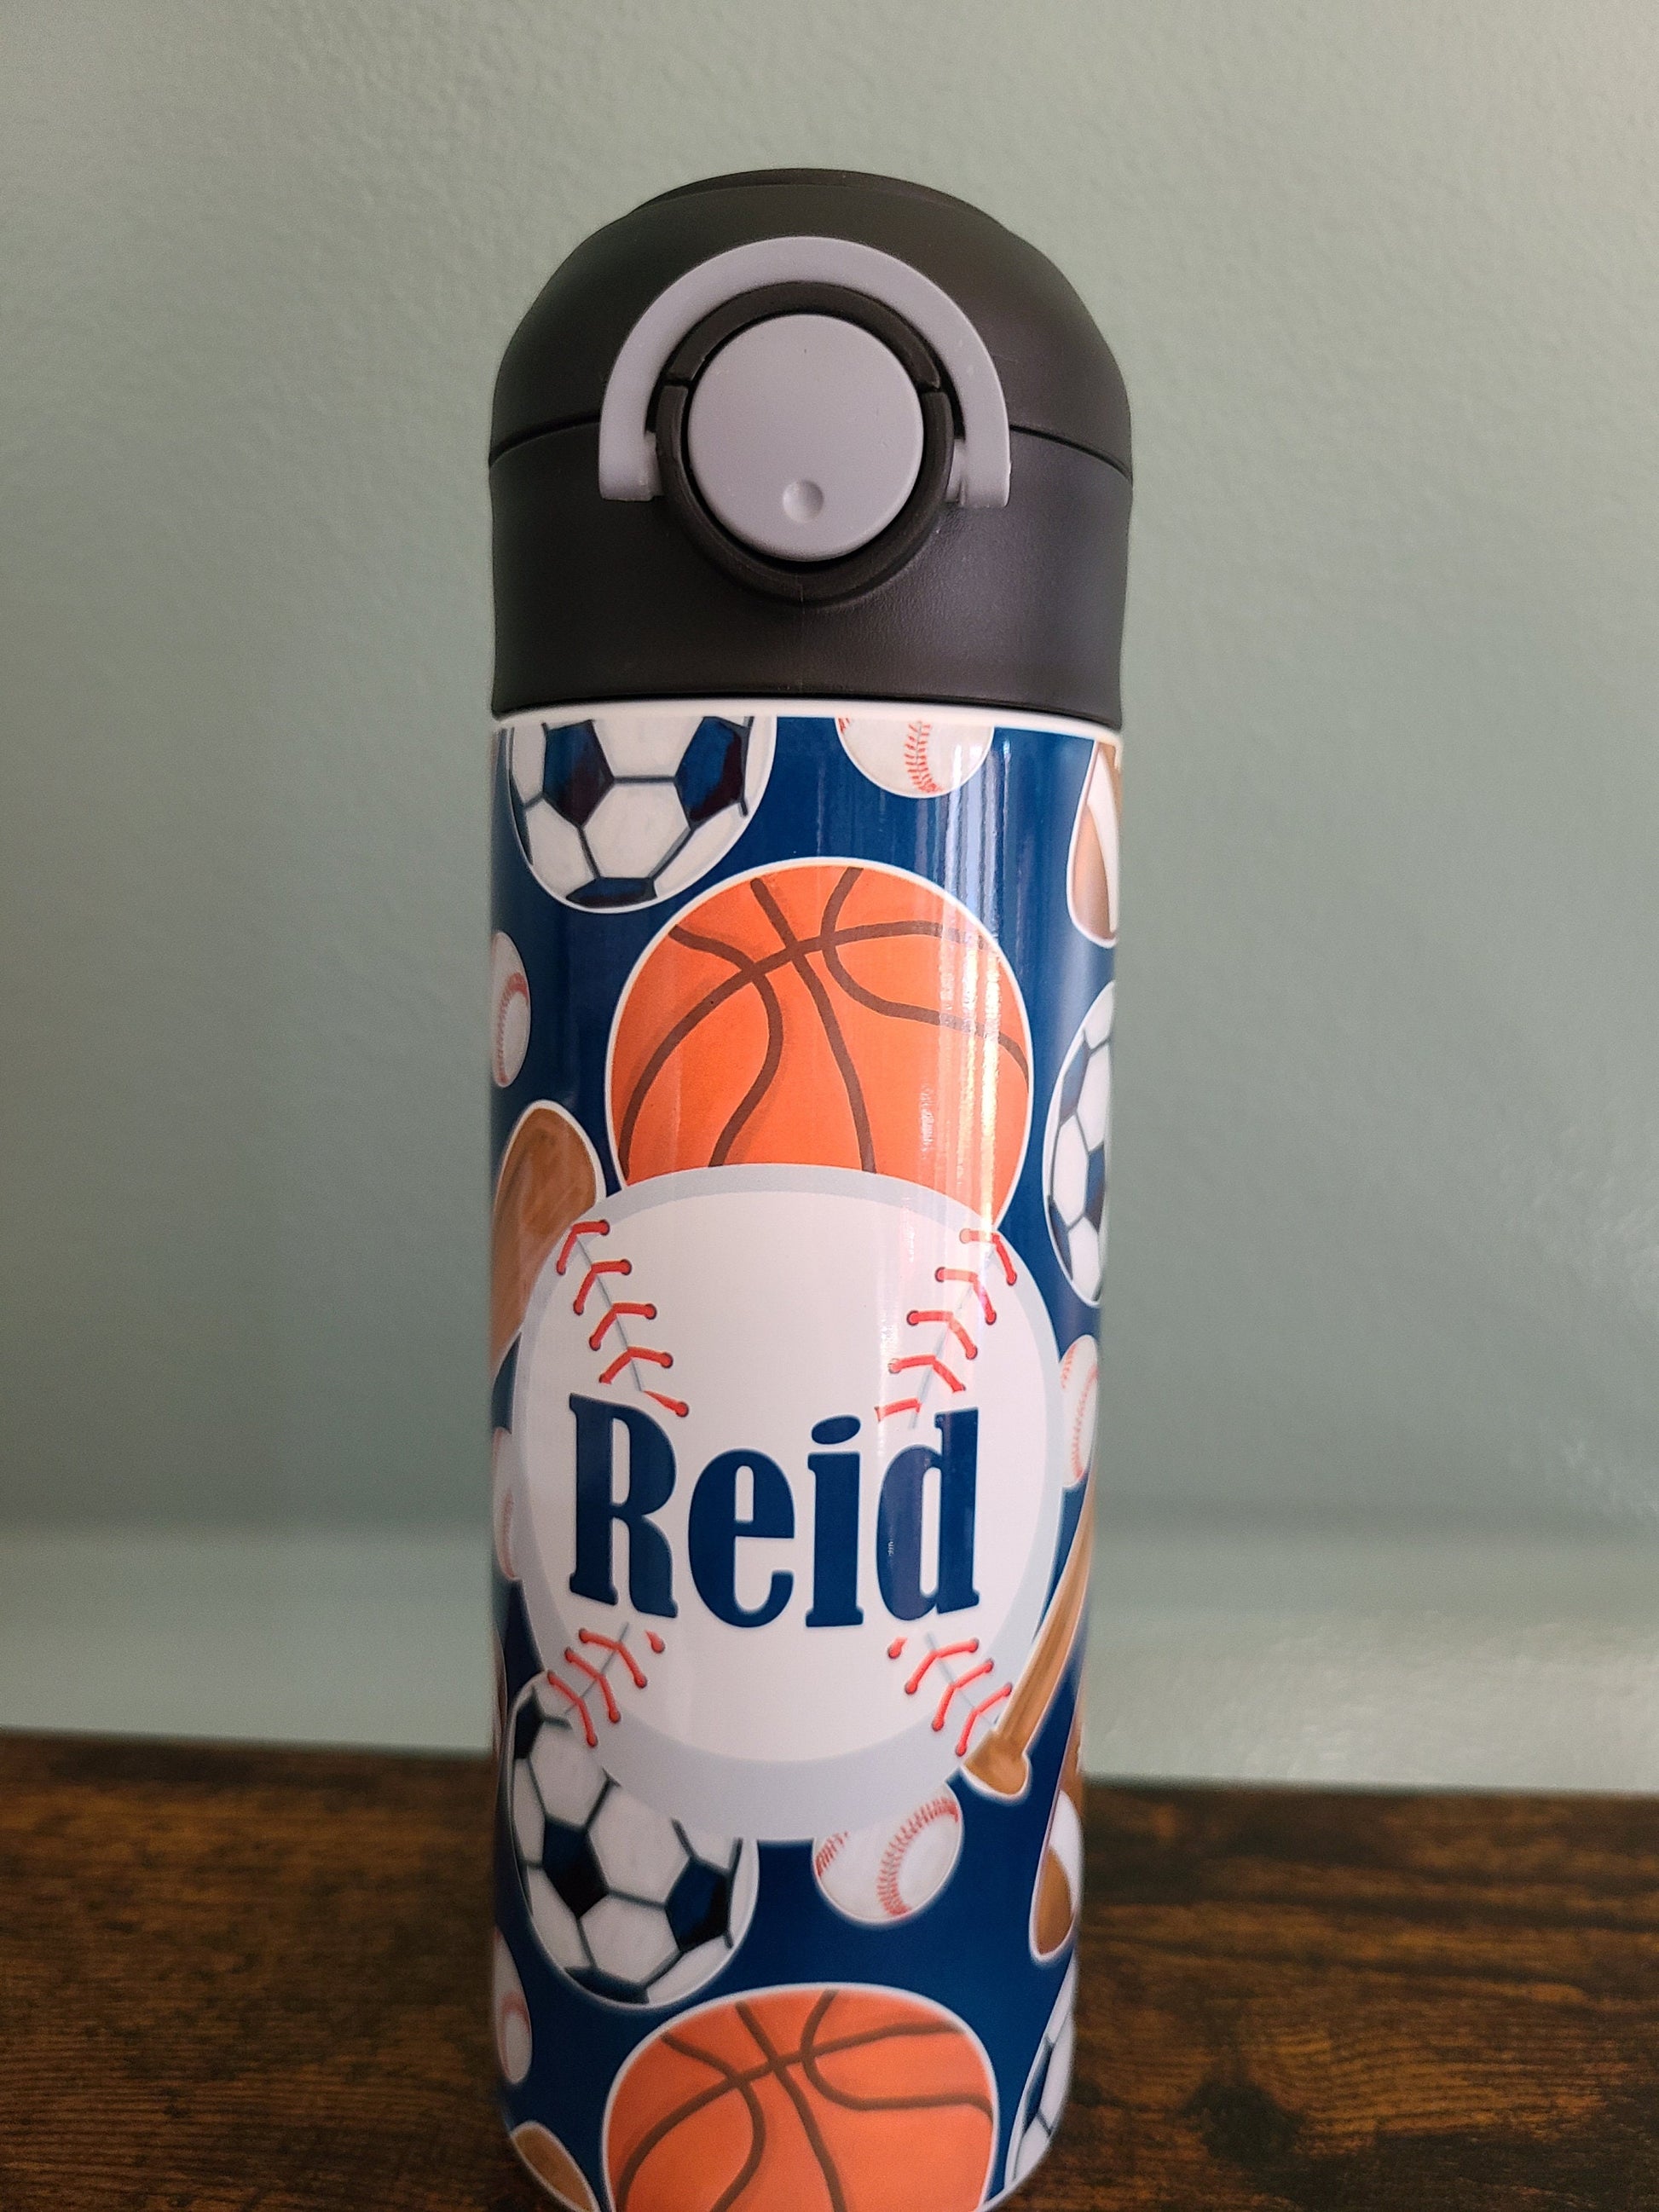 Personalized stainless steel waterbottle with straw, kids water bottle,  sublimated water bottle, school water bottle, sports bottle freeshipping -  LaceyRaeDesigns